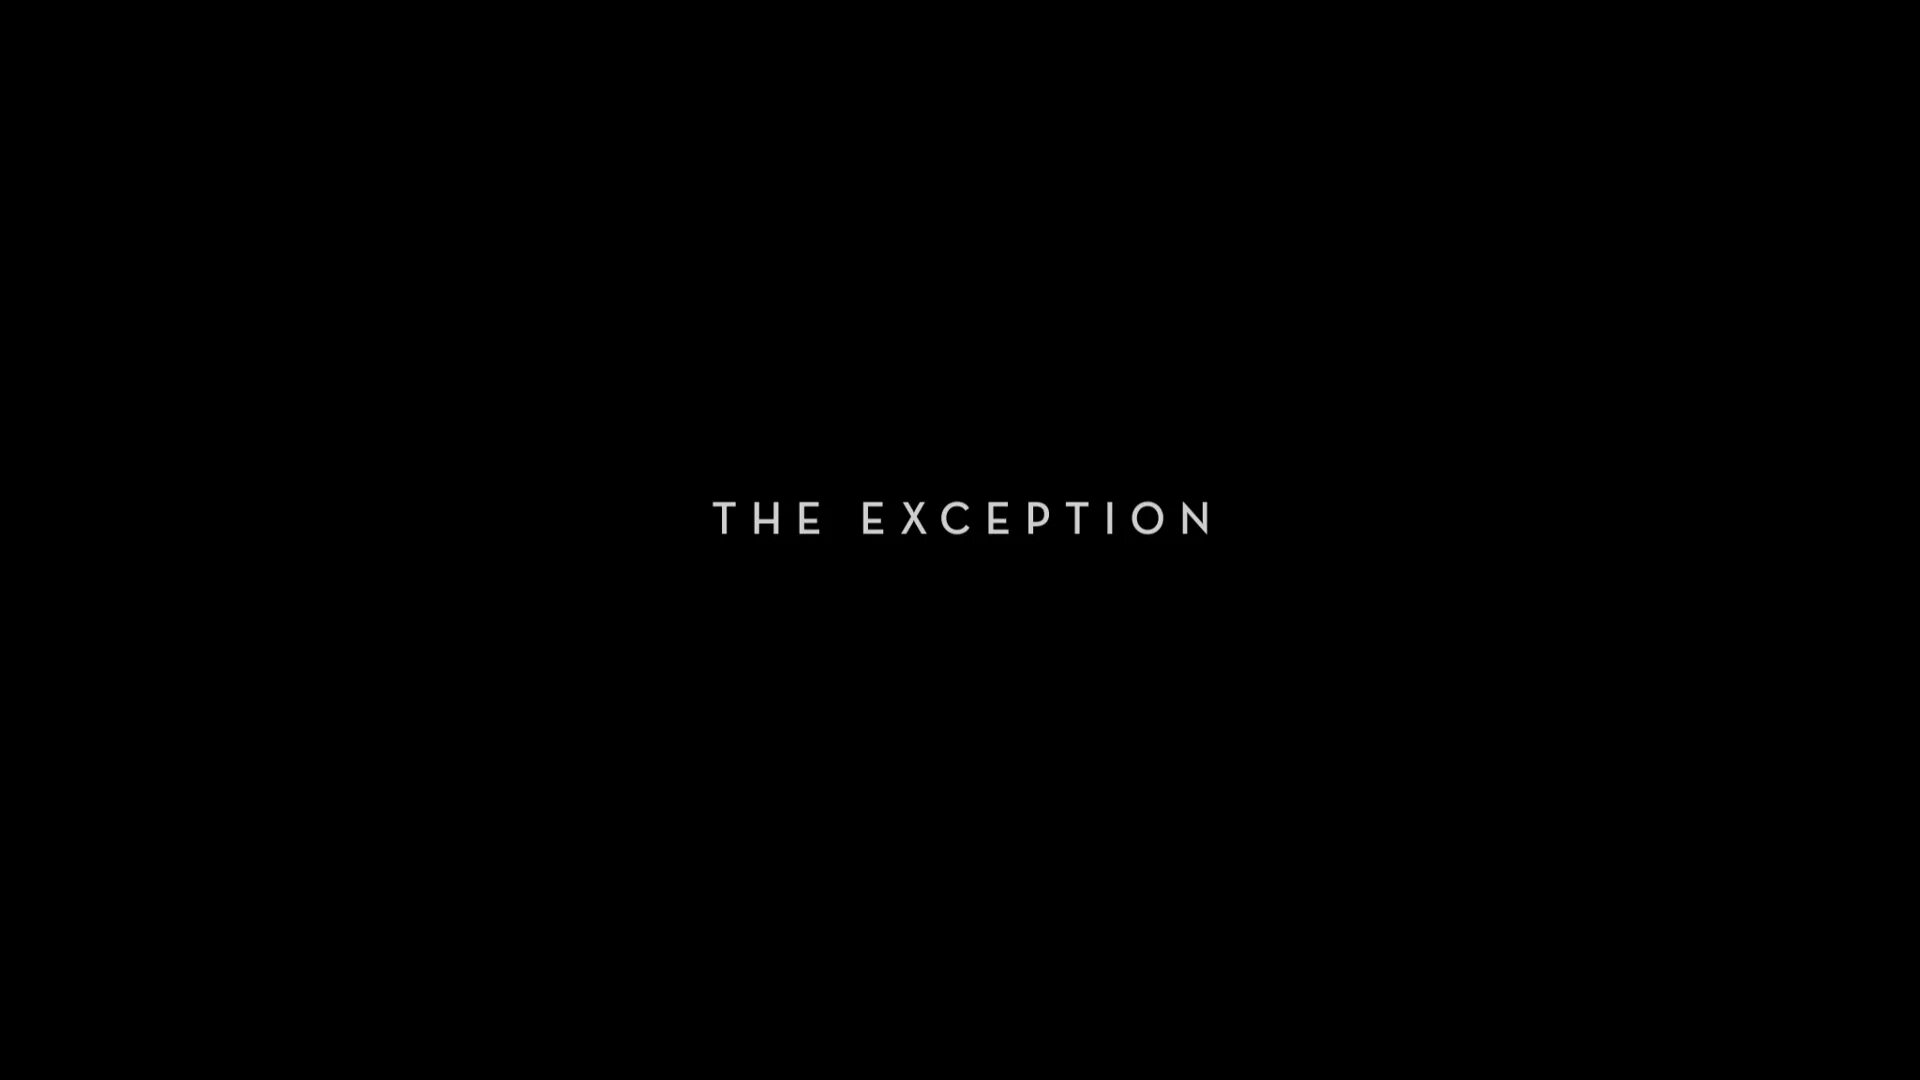 The only exception. The exceptions. The expection Agnes everyone.